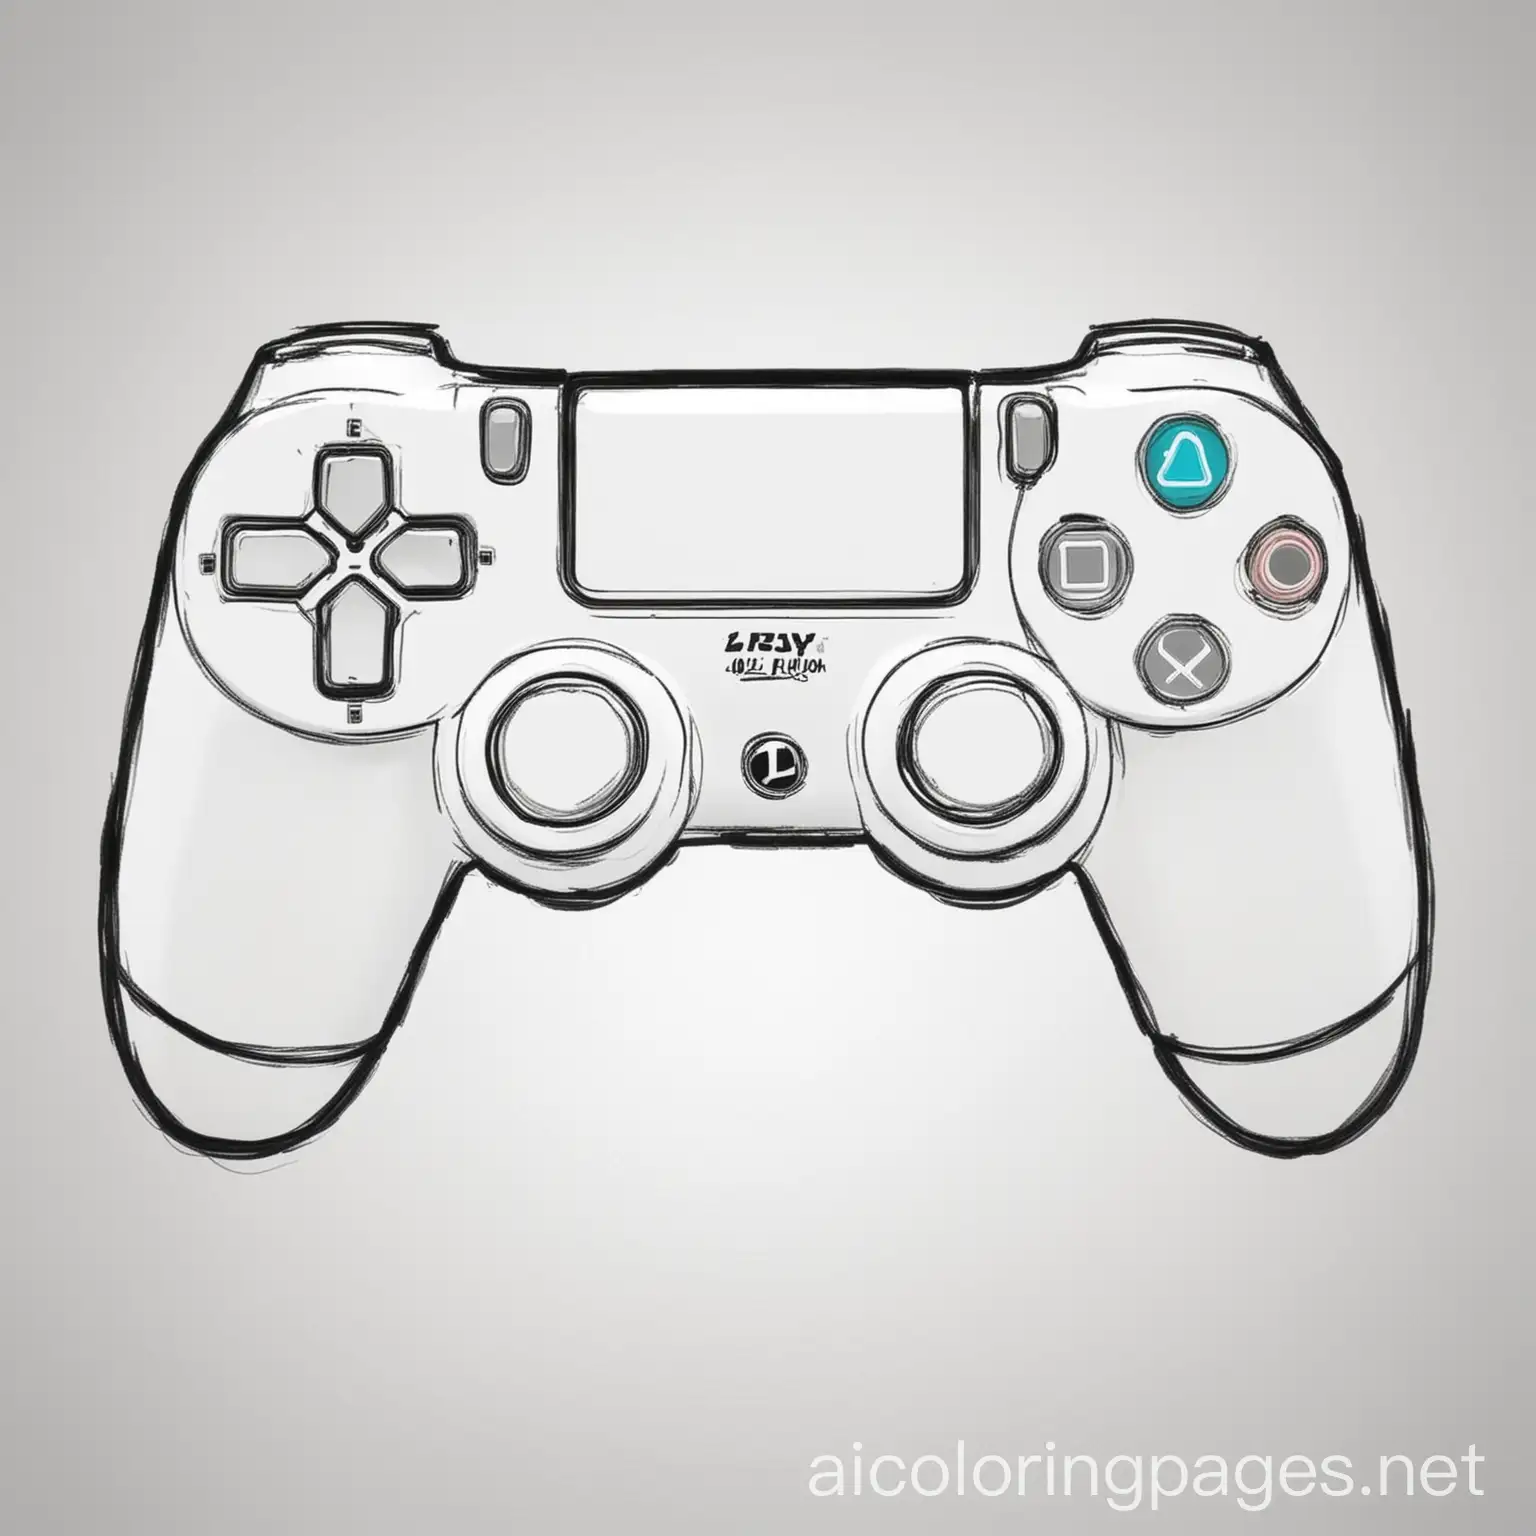 a playstation 4 controler coloring image, Coloring Page, black and white, line art, white background, Simplicity, Ample White Space. The background of the coloring page is plain white to make it easy for young children to color within the lines. The outlines of all the subjects are easy to distinguish, making it simple for kids to color without too much difficulty